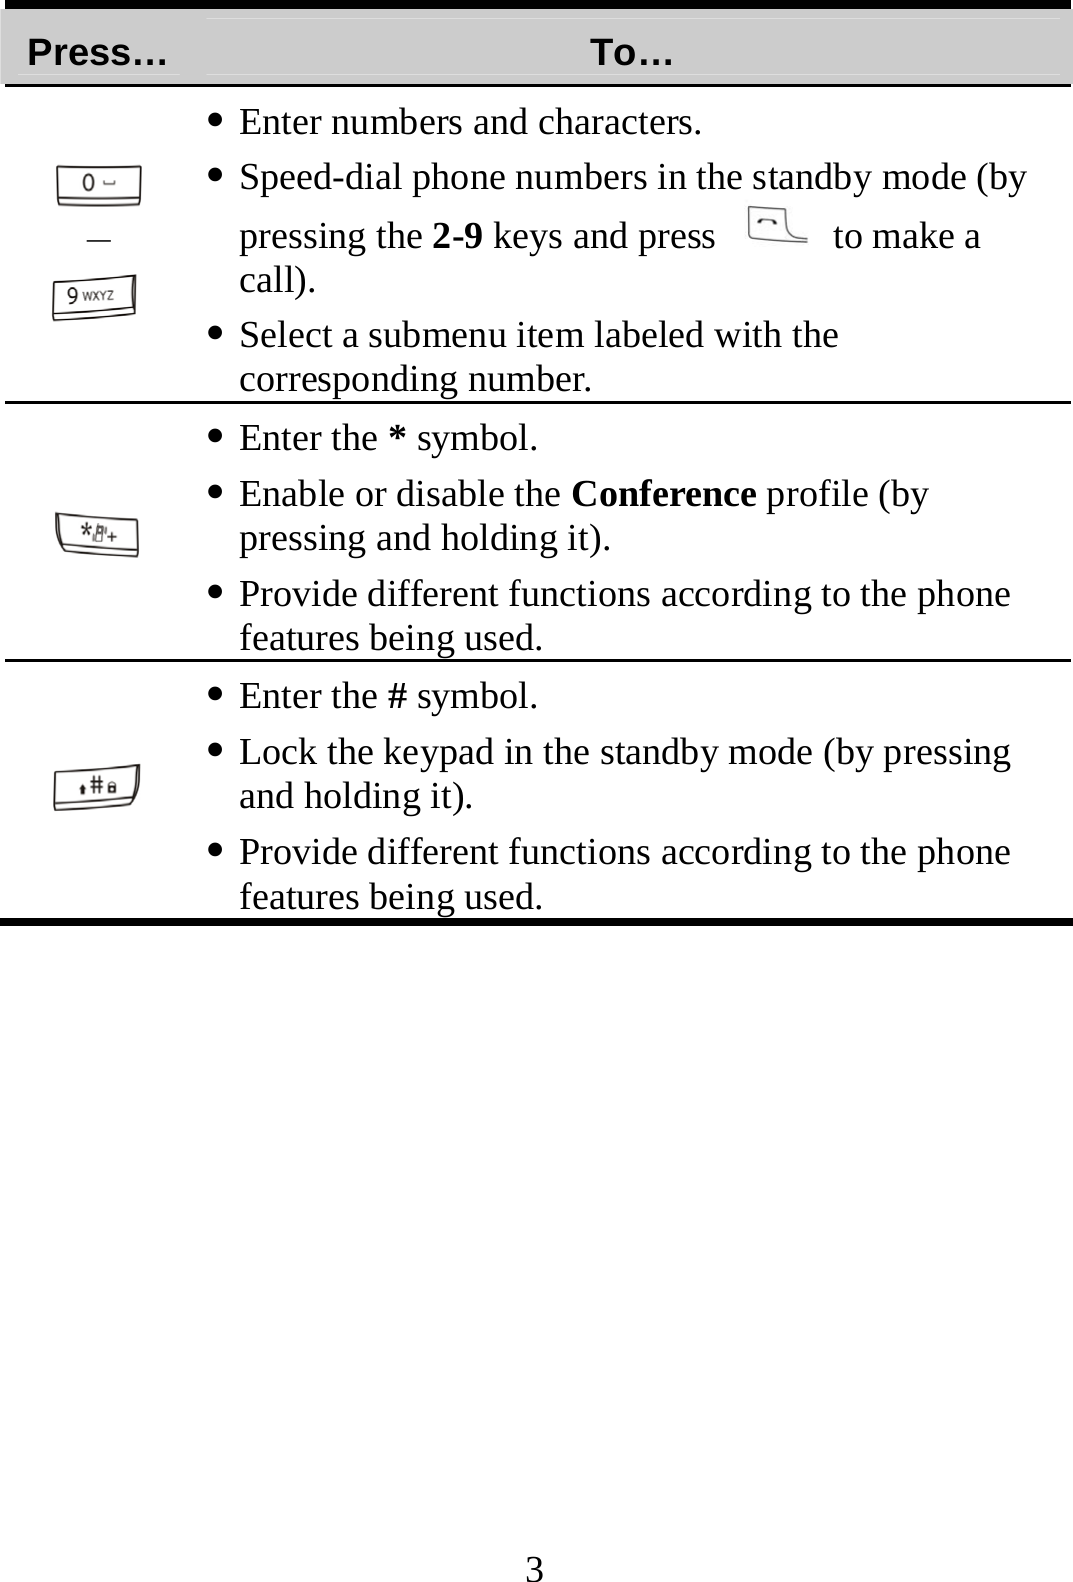 3 Press…  To…  －   z Enter numbers and characters. z Speed-dial phone numbers in the standby mode (by pressing the 2-9 keys and press    to make a call). z Select a submenu item labeled with the corresponding number.  z Enter the * symbol. z Enable or disable the Conference profile (by pressing and holding it). z Provide different functions according to the phone features being used.  z Enter the # symbol. z Lock the keypad in the standby mode (by pressing and holding it). z Provide different functions according to the phone features being used.  